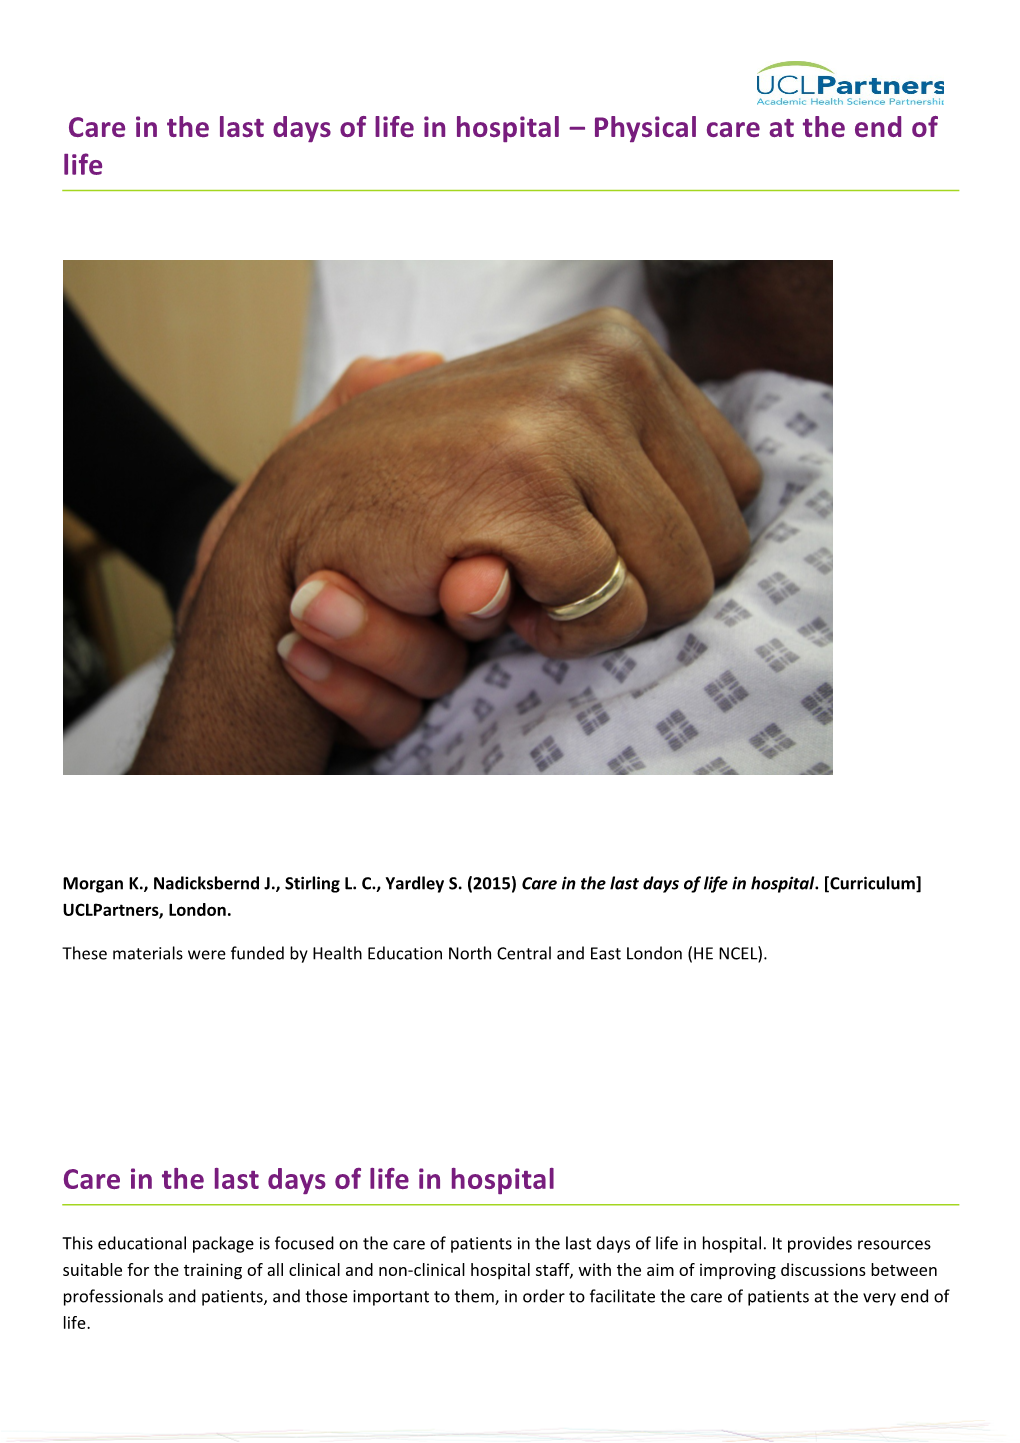 Care in the Last Days of Life in Hospital Physical Care at the End of Life